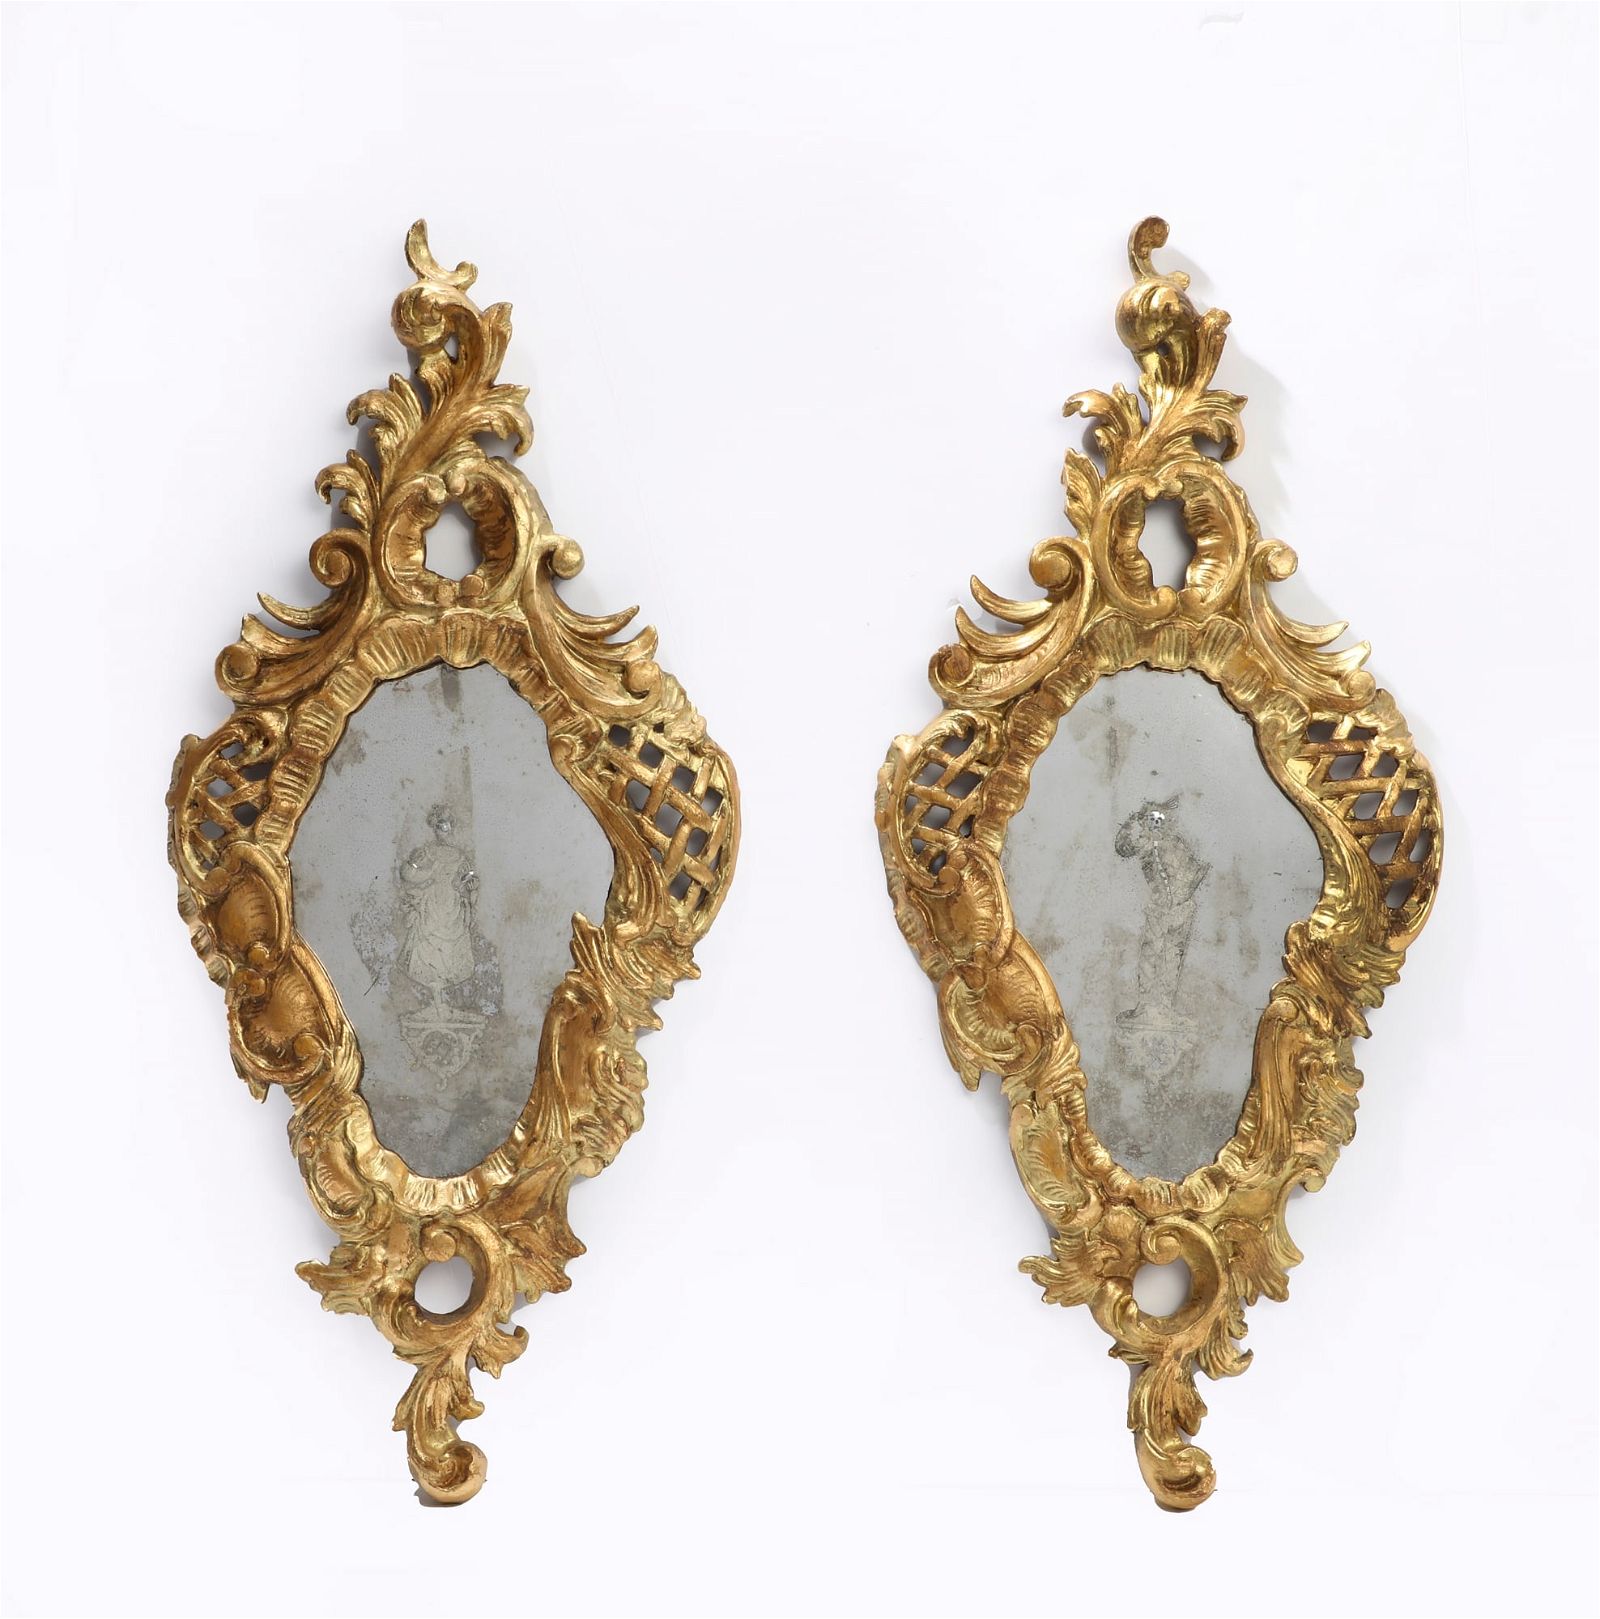 A PAIR OF ITALIAN ROCOCO STYLE